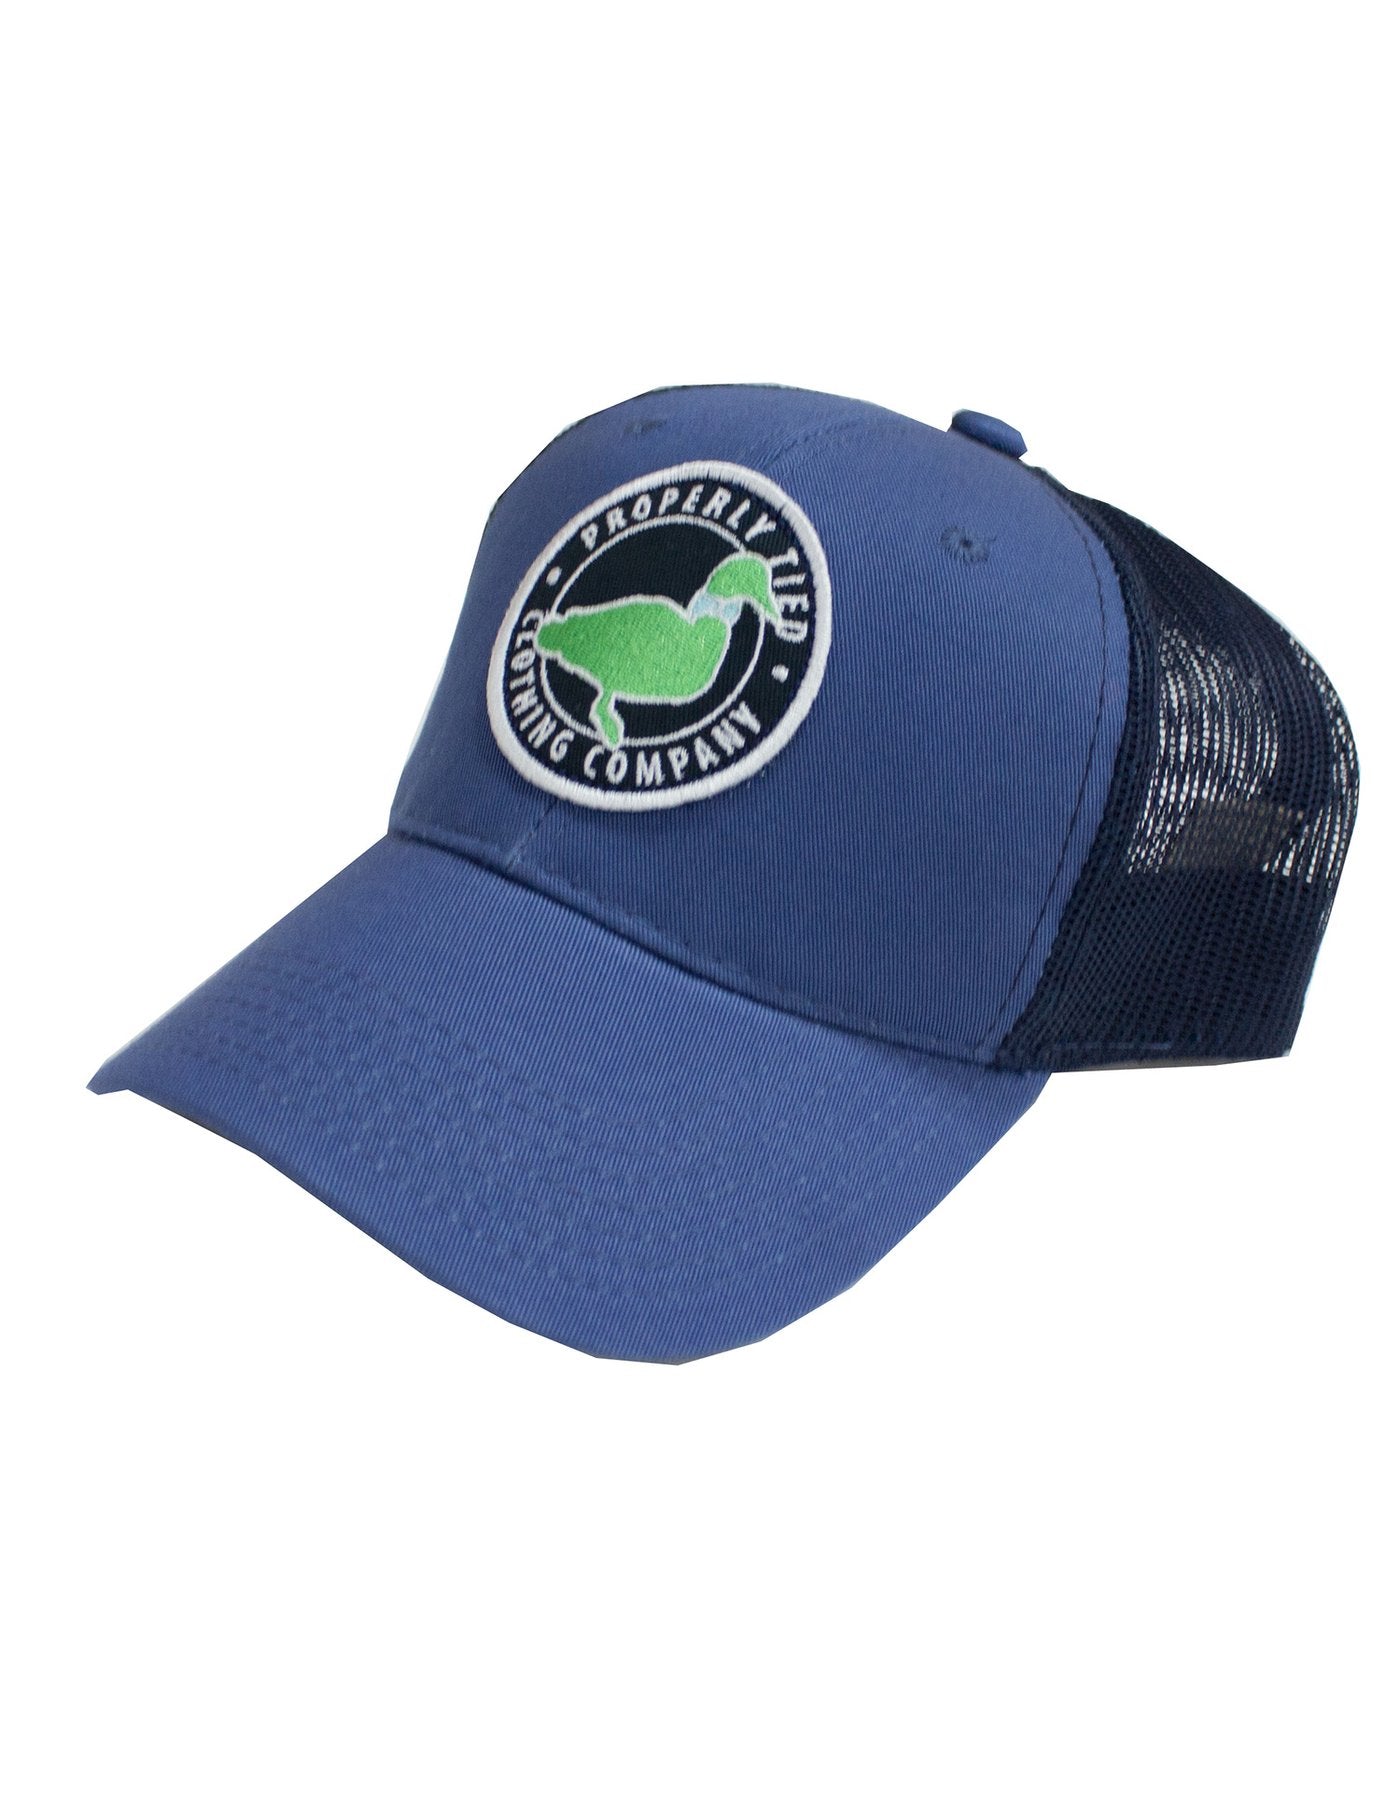 Youth Trucker Hat with Circle Logo  - Doodlebug's Children's Boutique